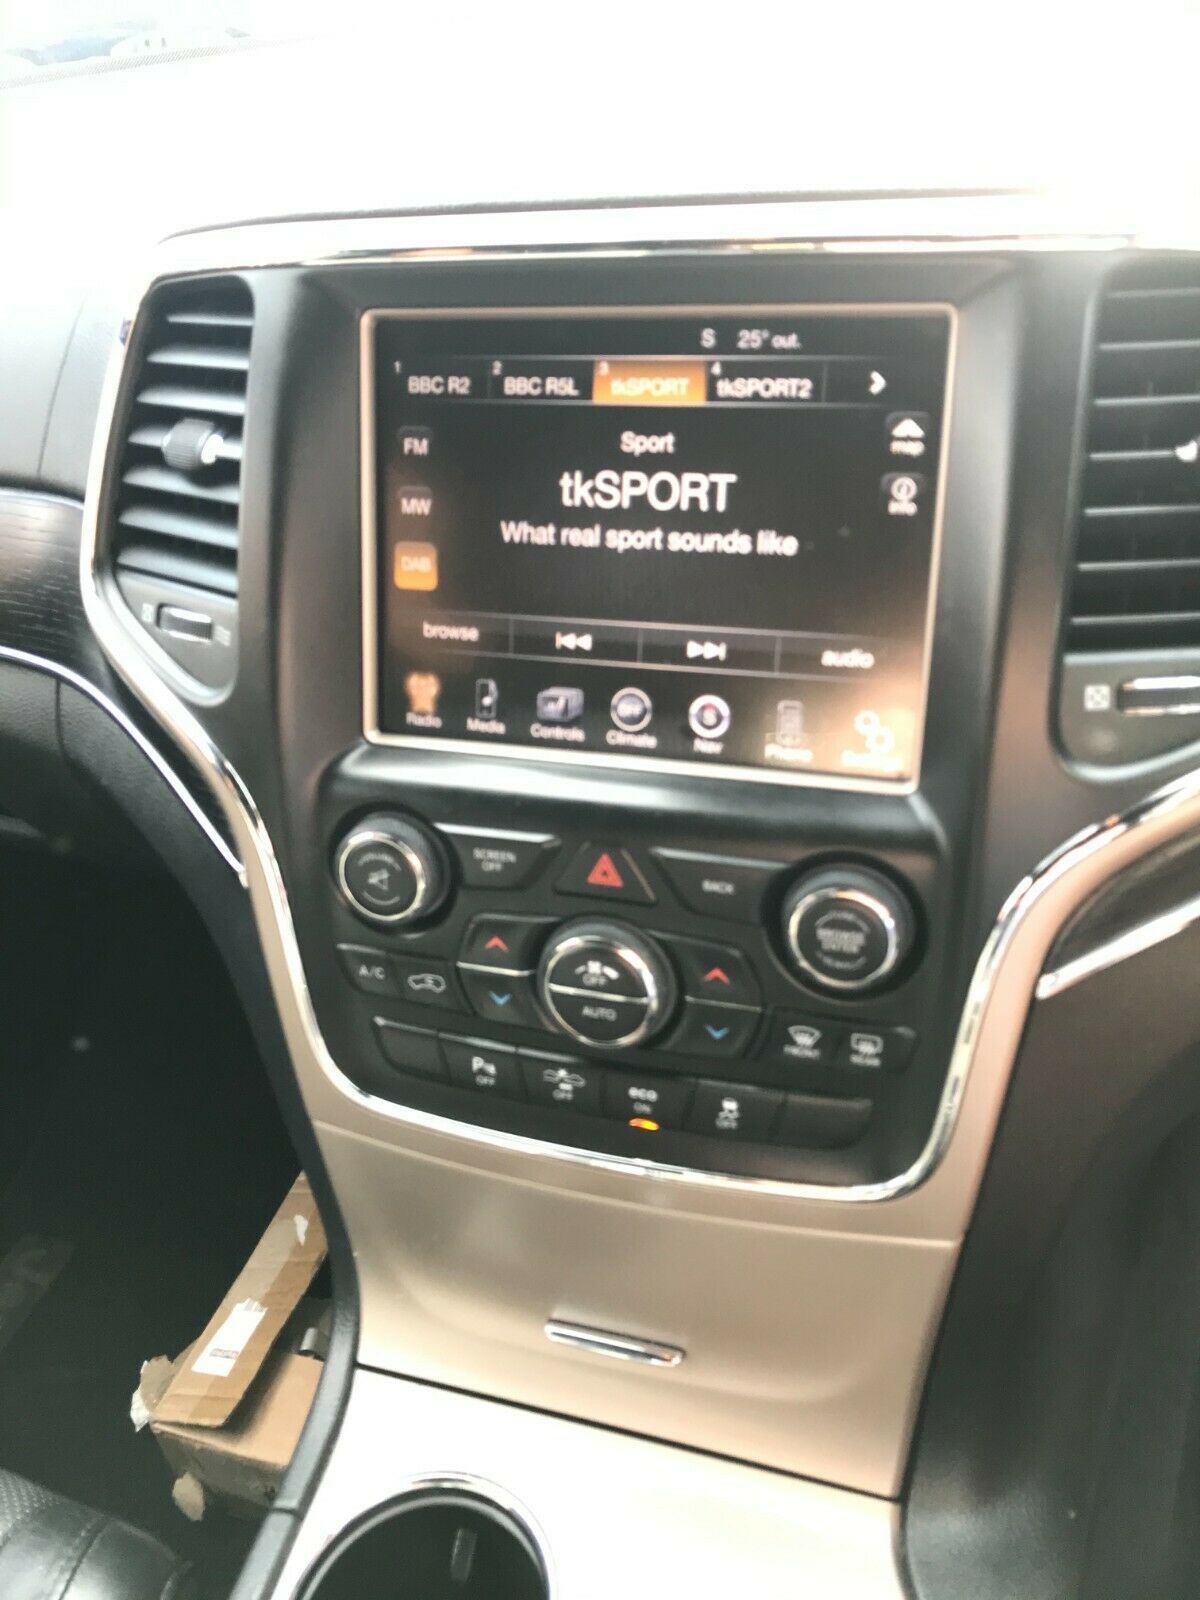 2012 jeep grand cherokee uconnect not avalibel